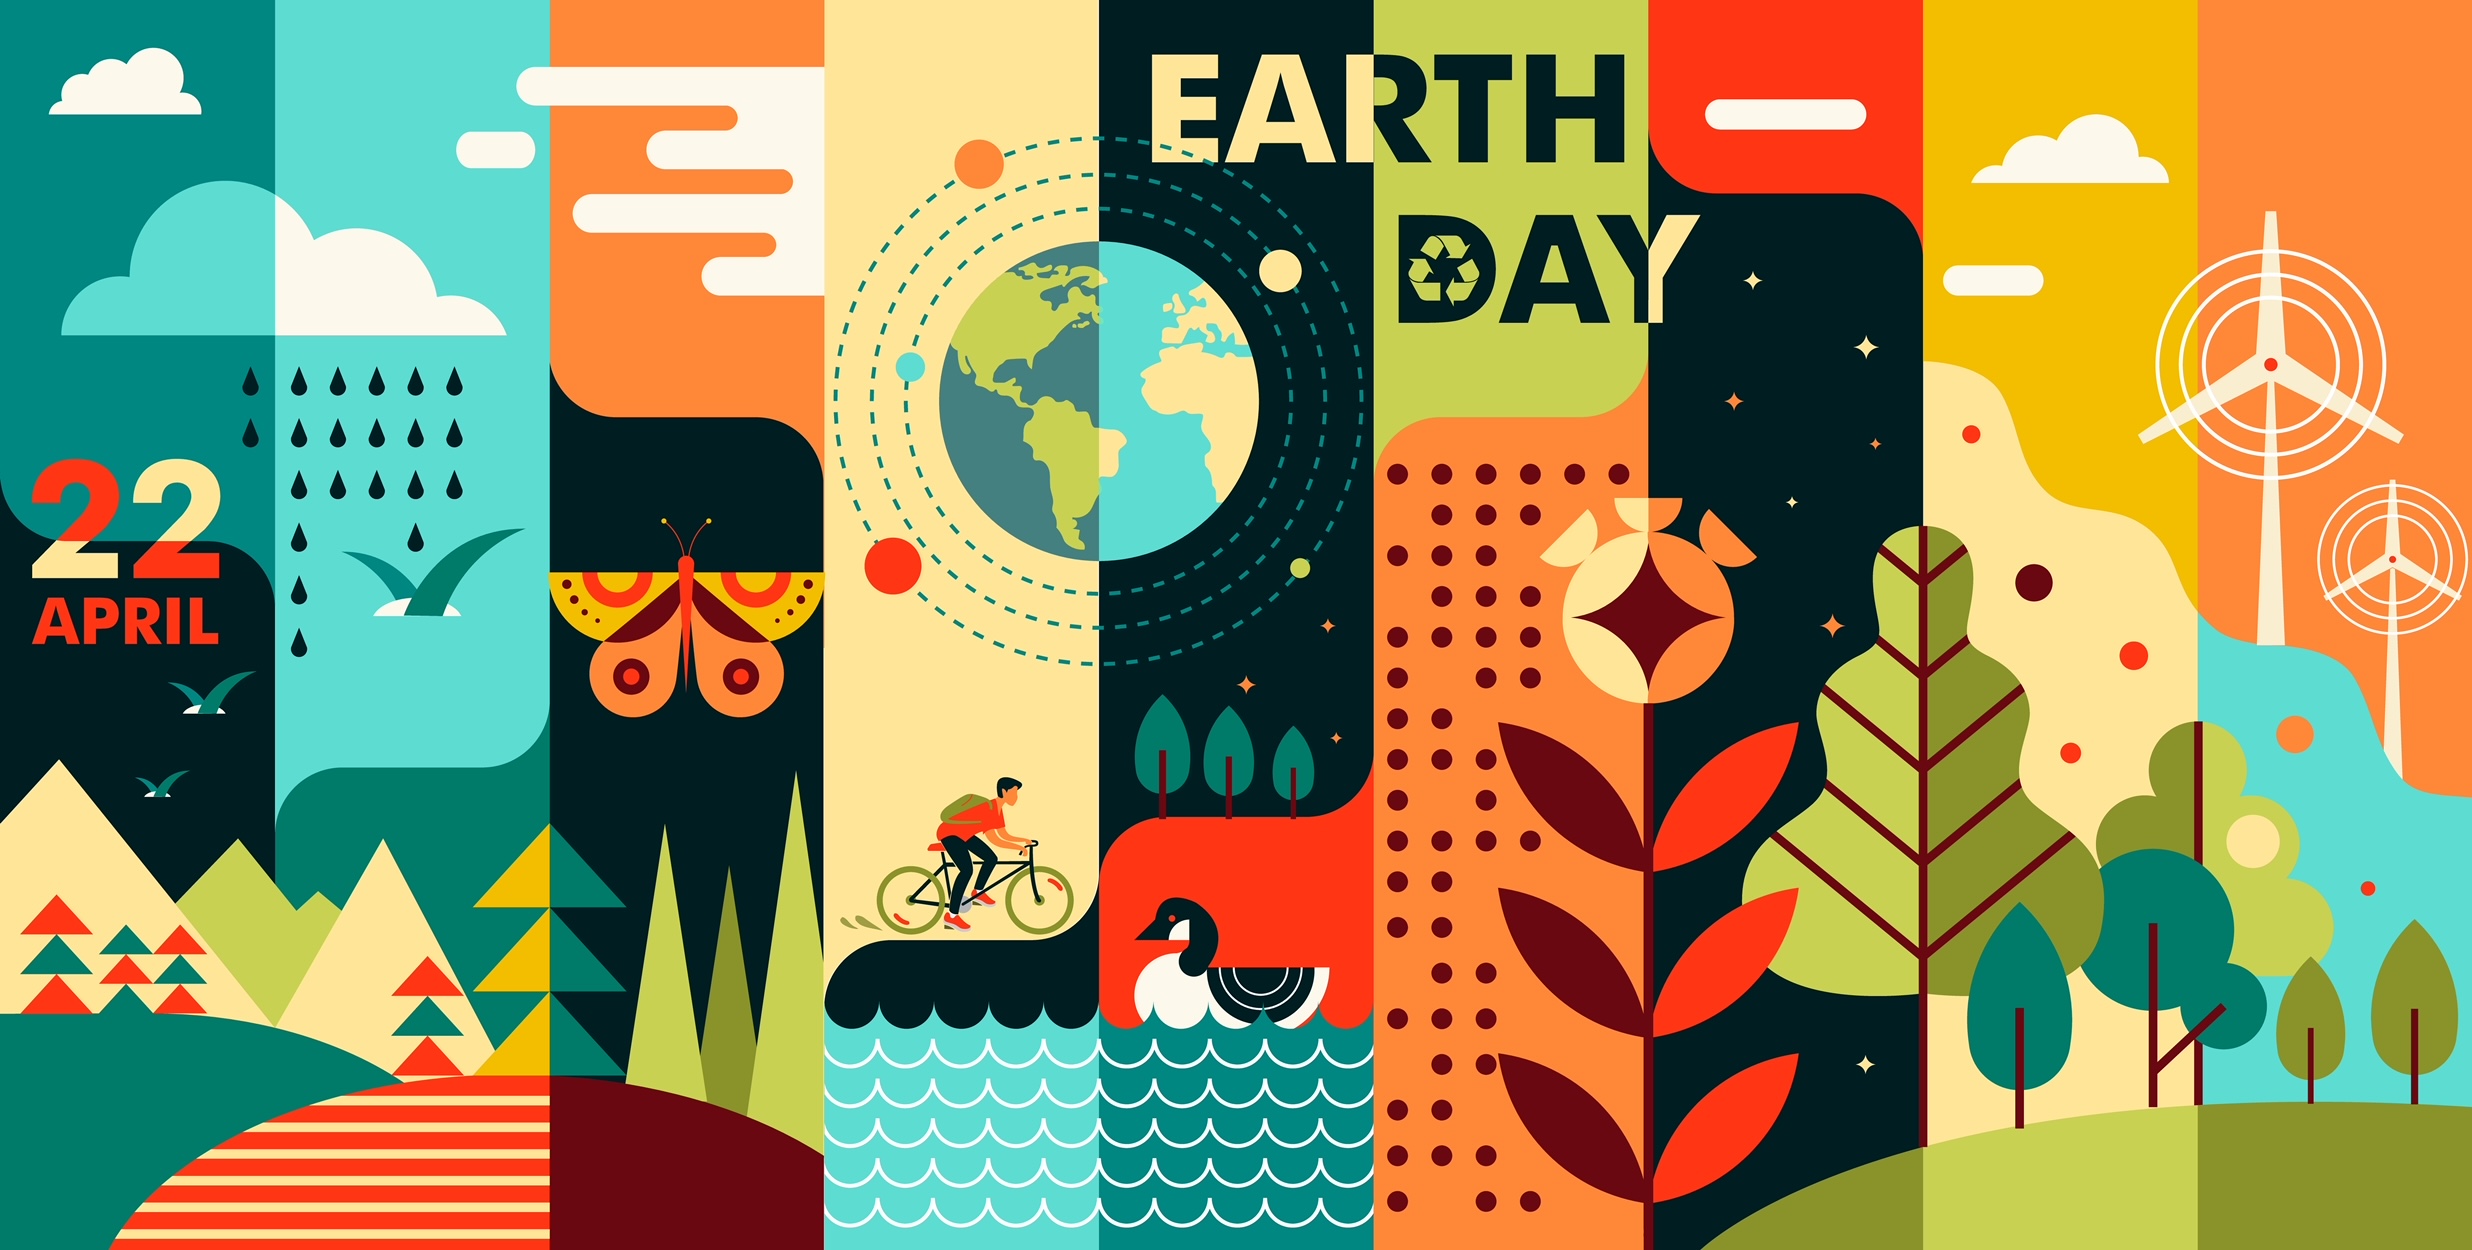 Earth Day Celebration Week, April 16th April 23rd, 2022 The